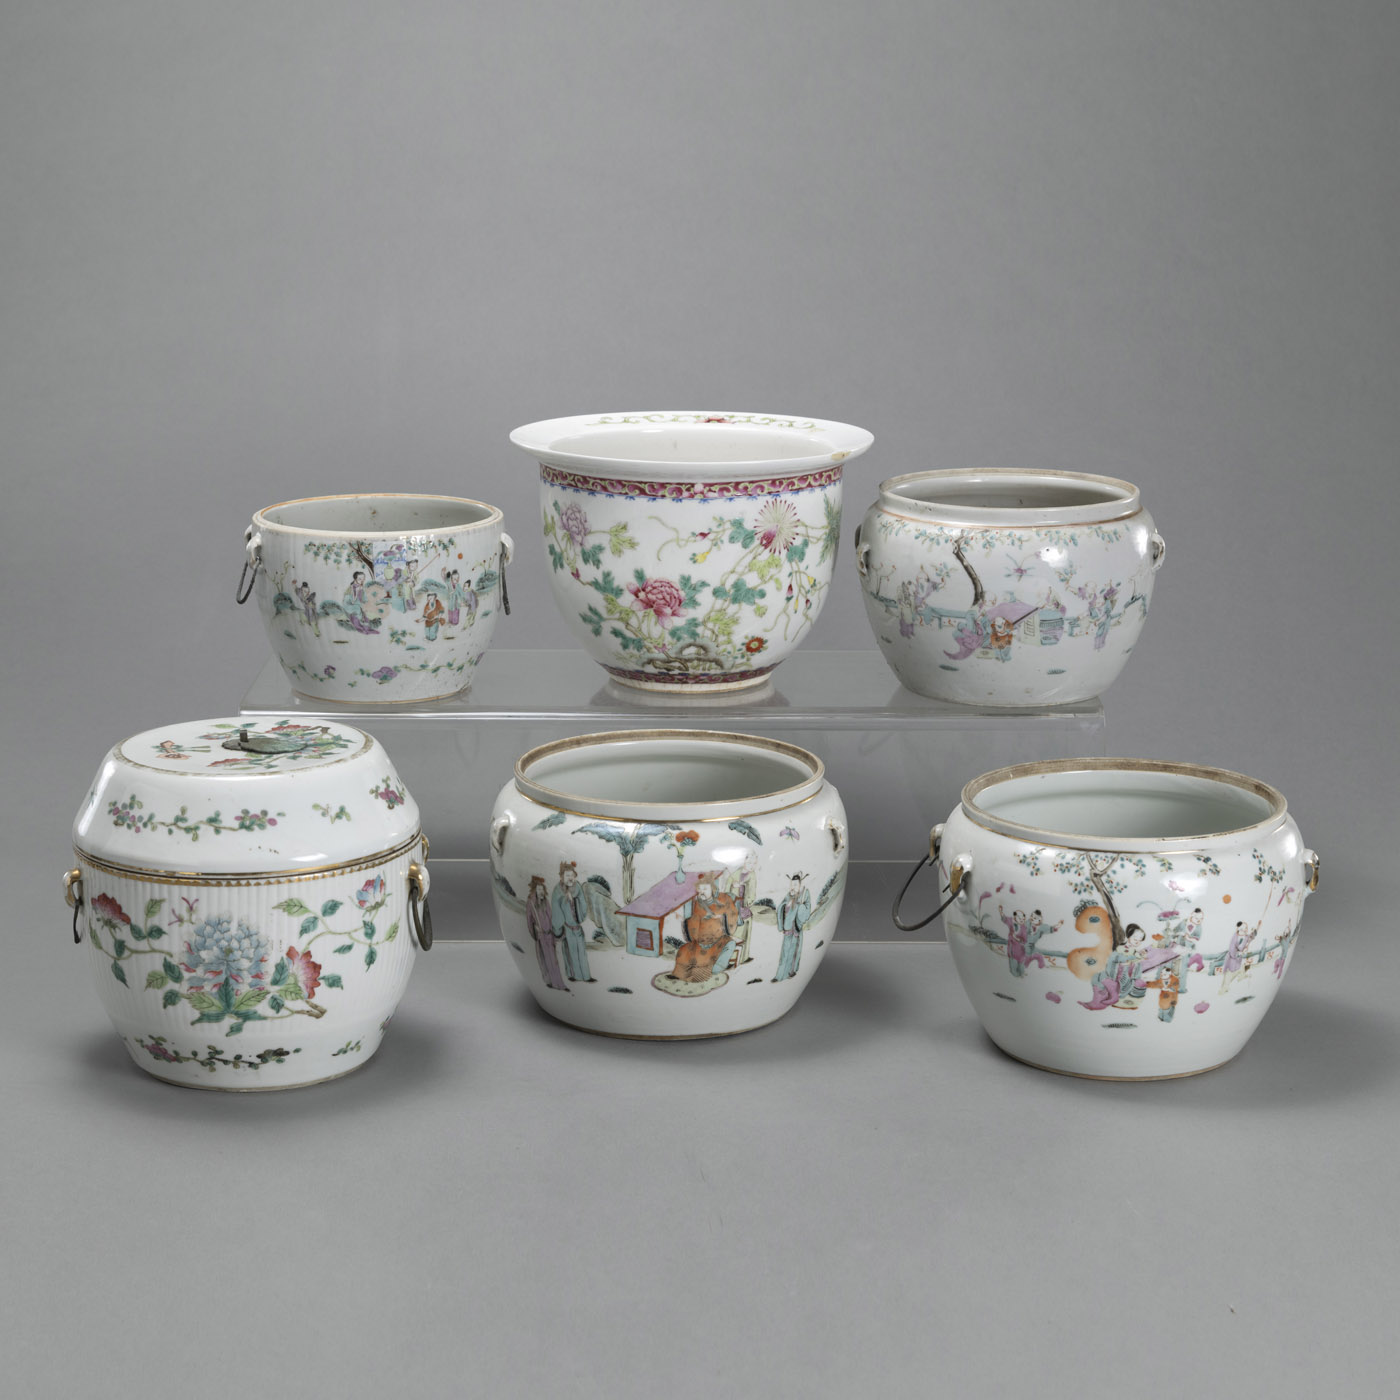 <b>SIX 'FAMILLE ROSE' PORCELAIN JARS (ONE WITH COVER) WITH FIGURAL AND FLORAL DECORATION</b>